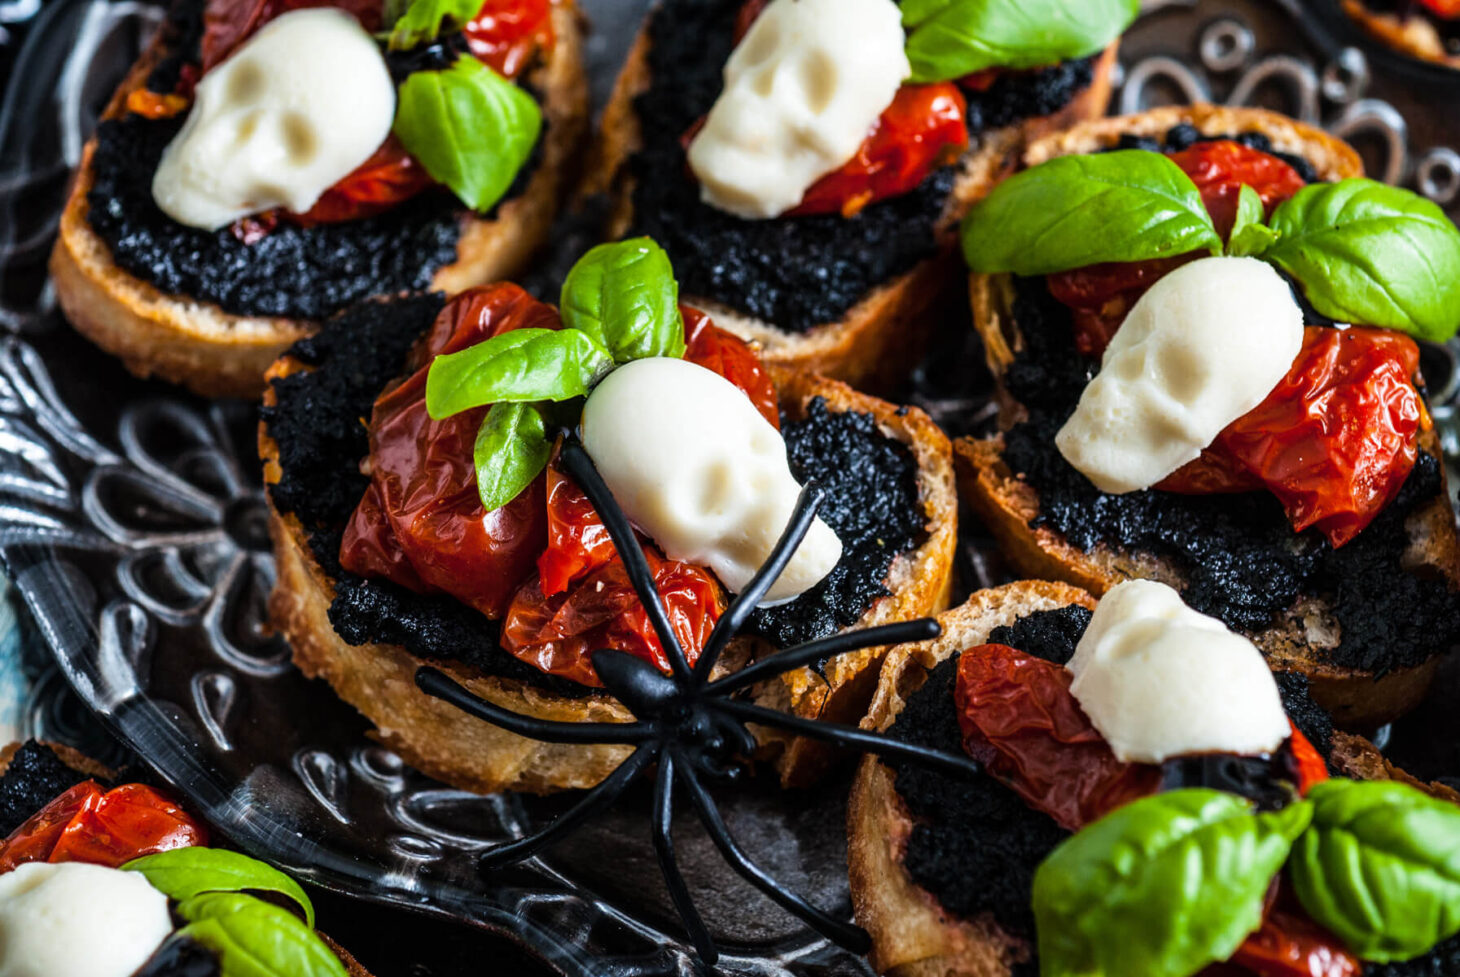 A spooky scene featuring a silver tray of caprese crostini decorated with mozzarella skulls and spiders.